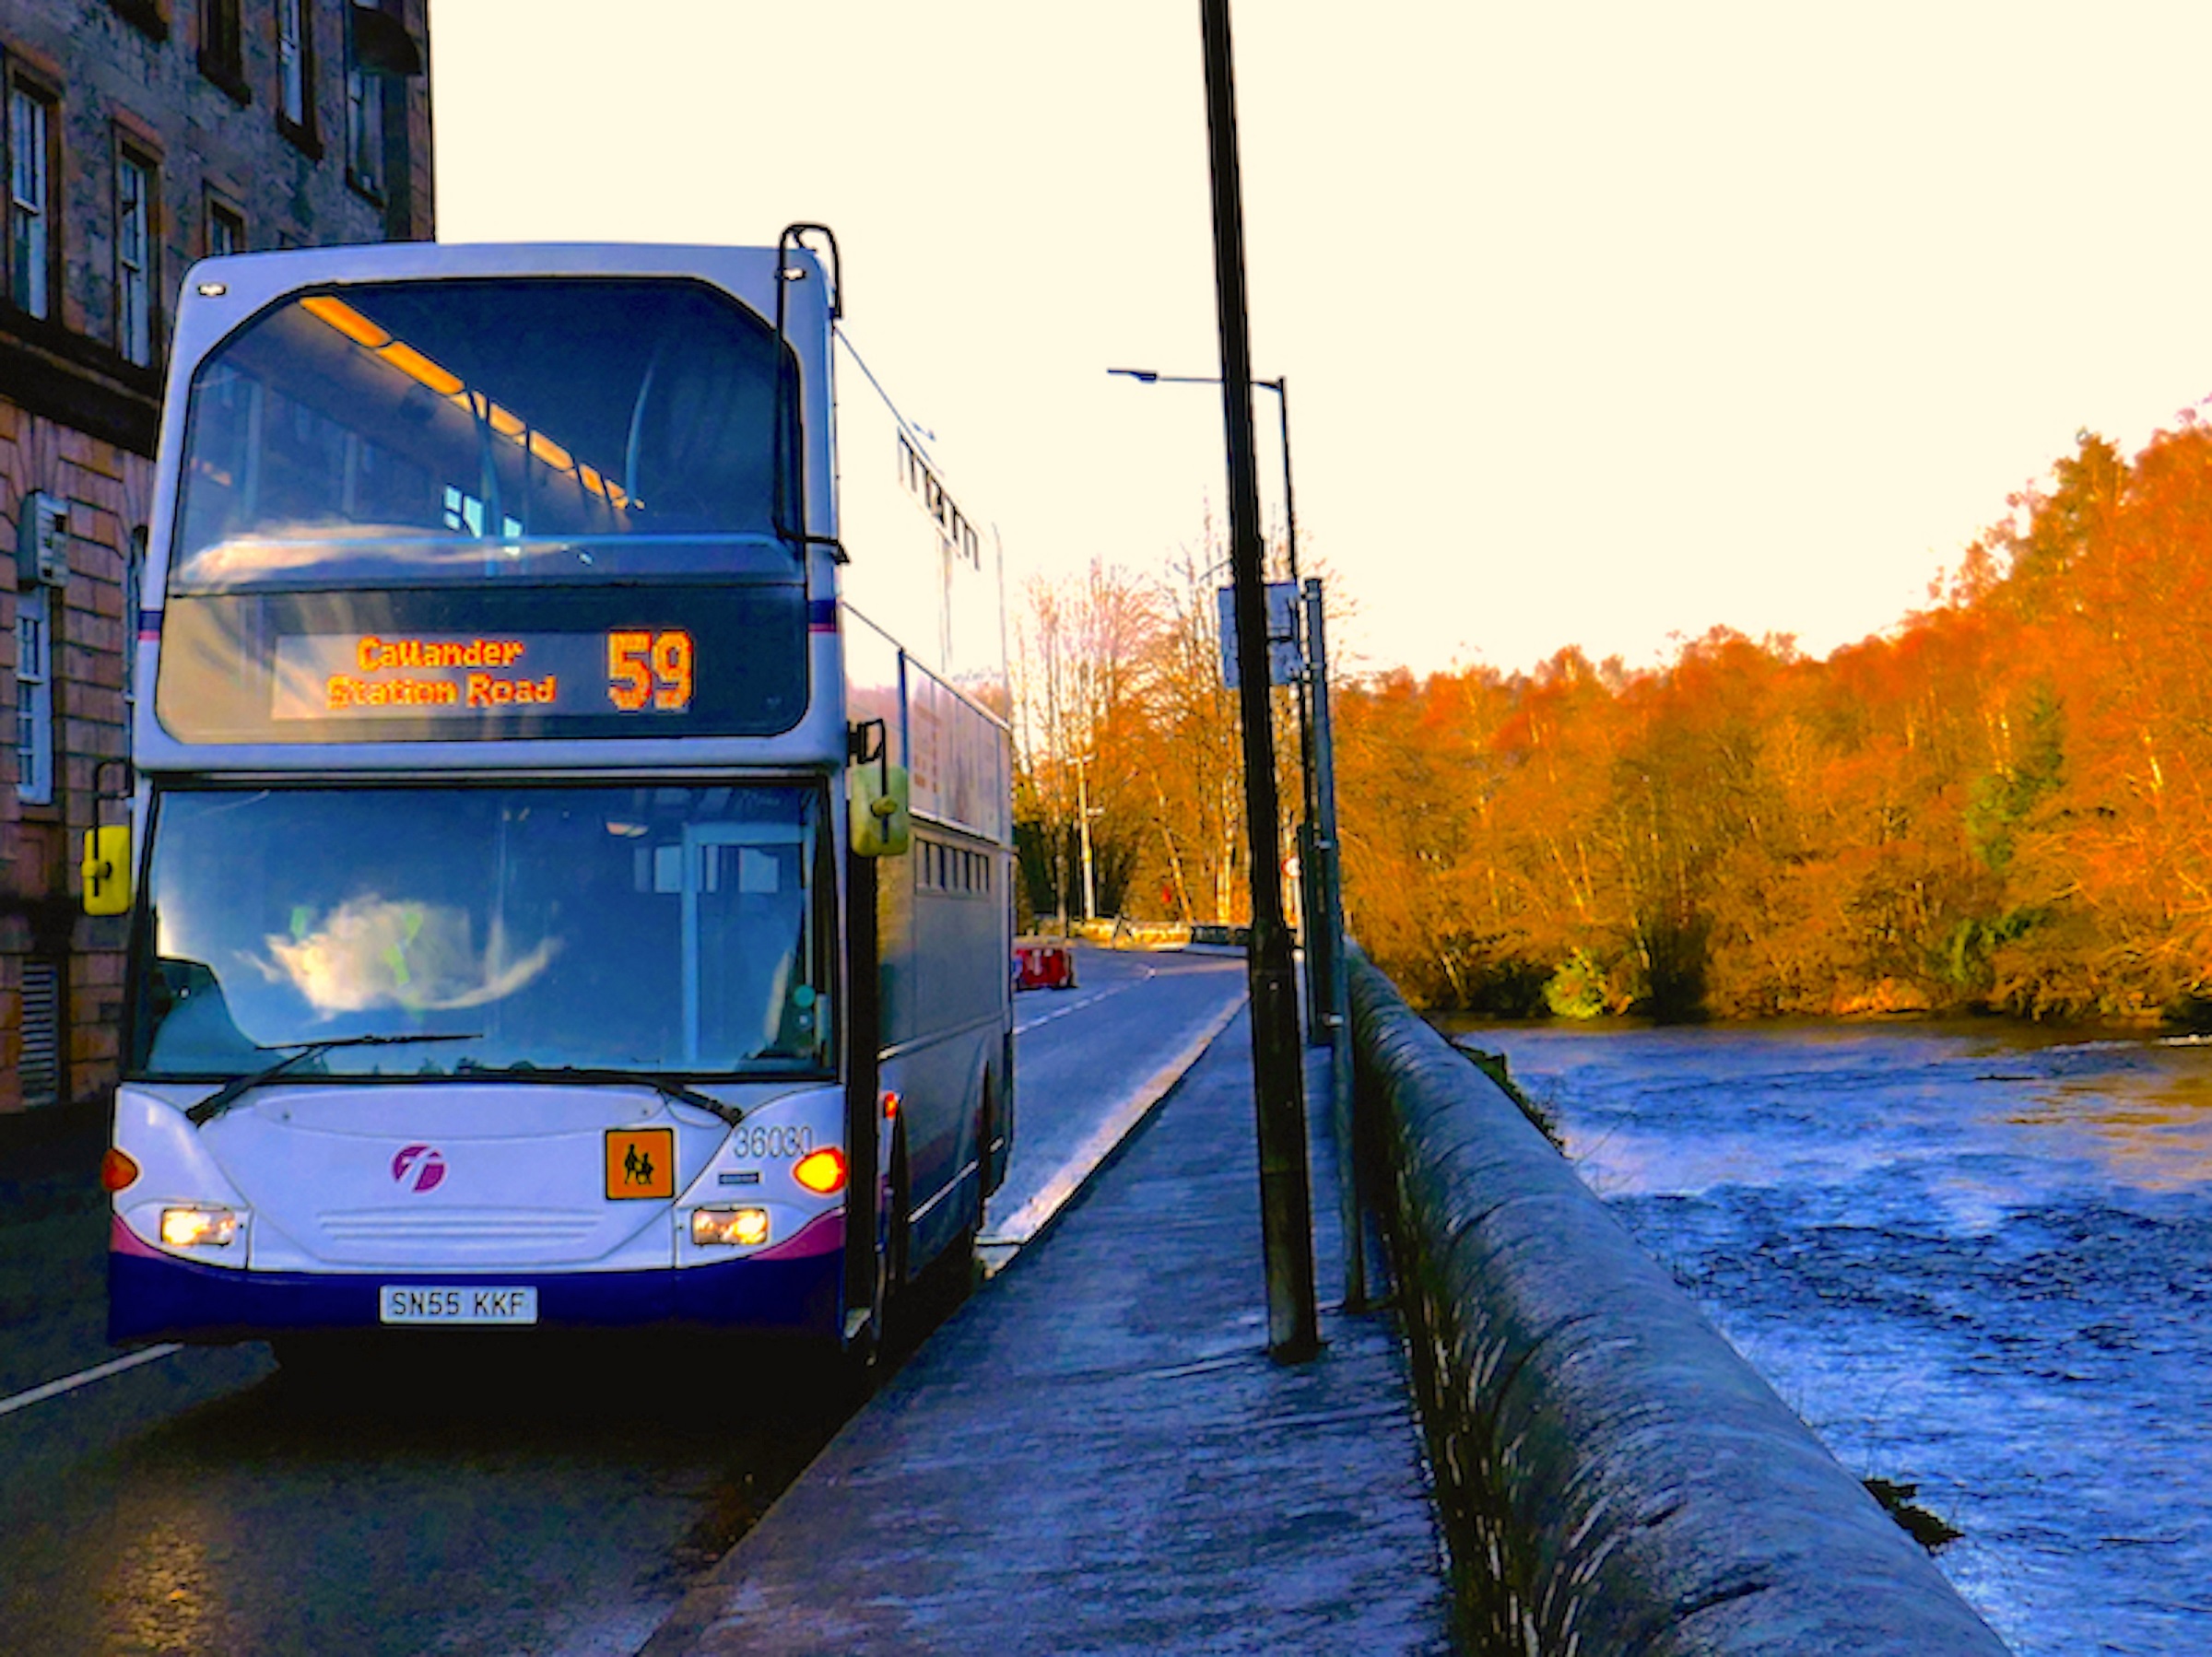 A double decker bus with the number 59 on it on the side of a road next to a river